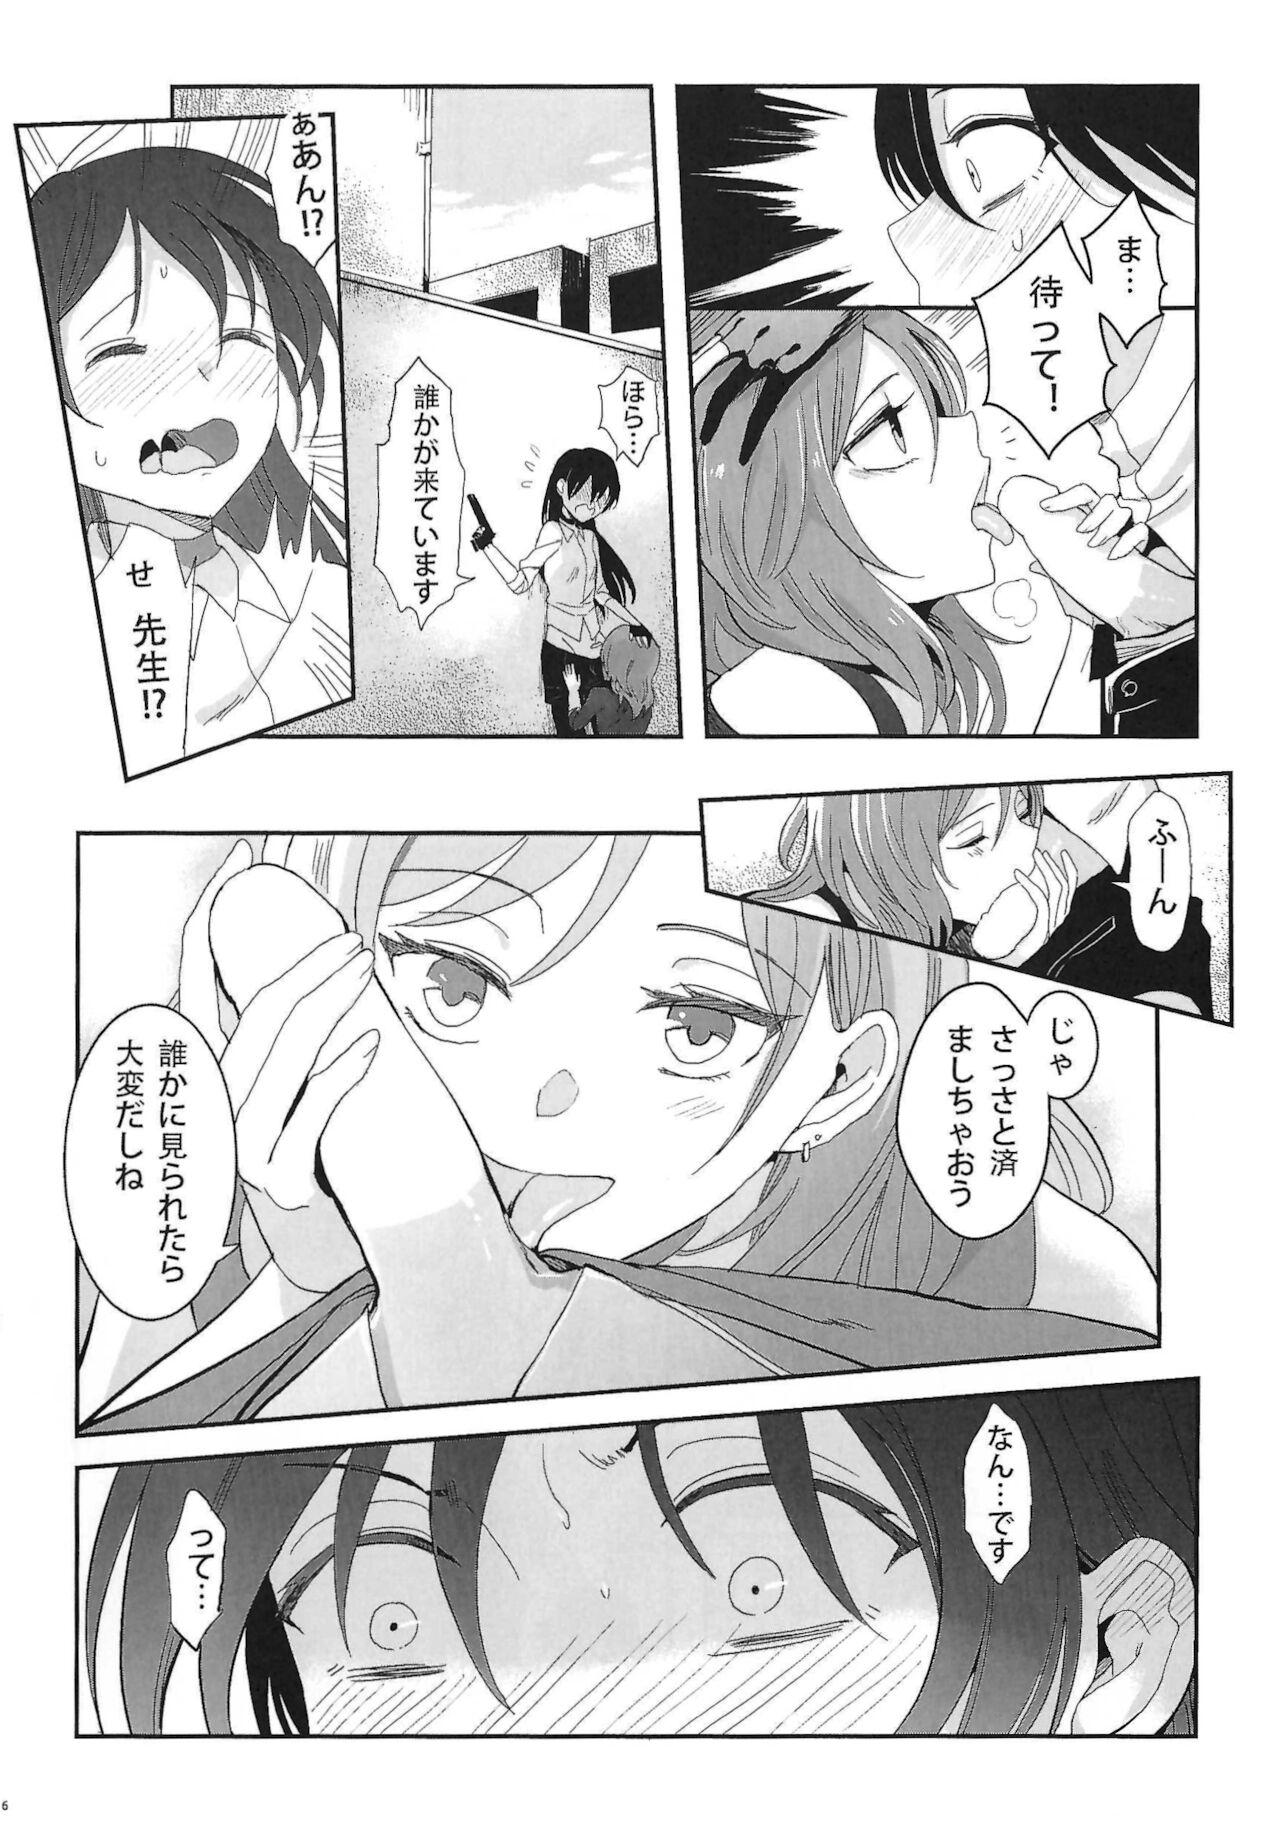 Exhibition 斜辺線 - Love live Teasing - Page 7